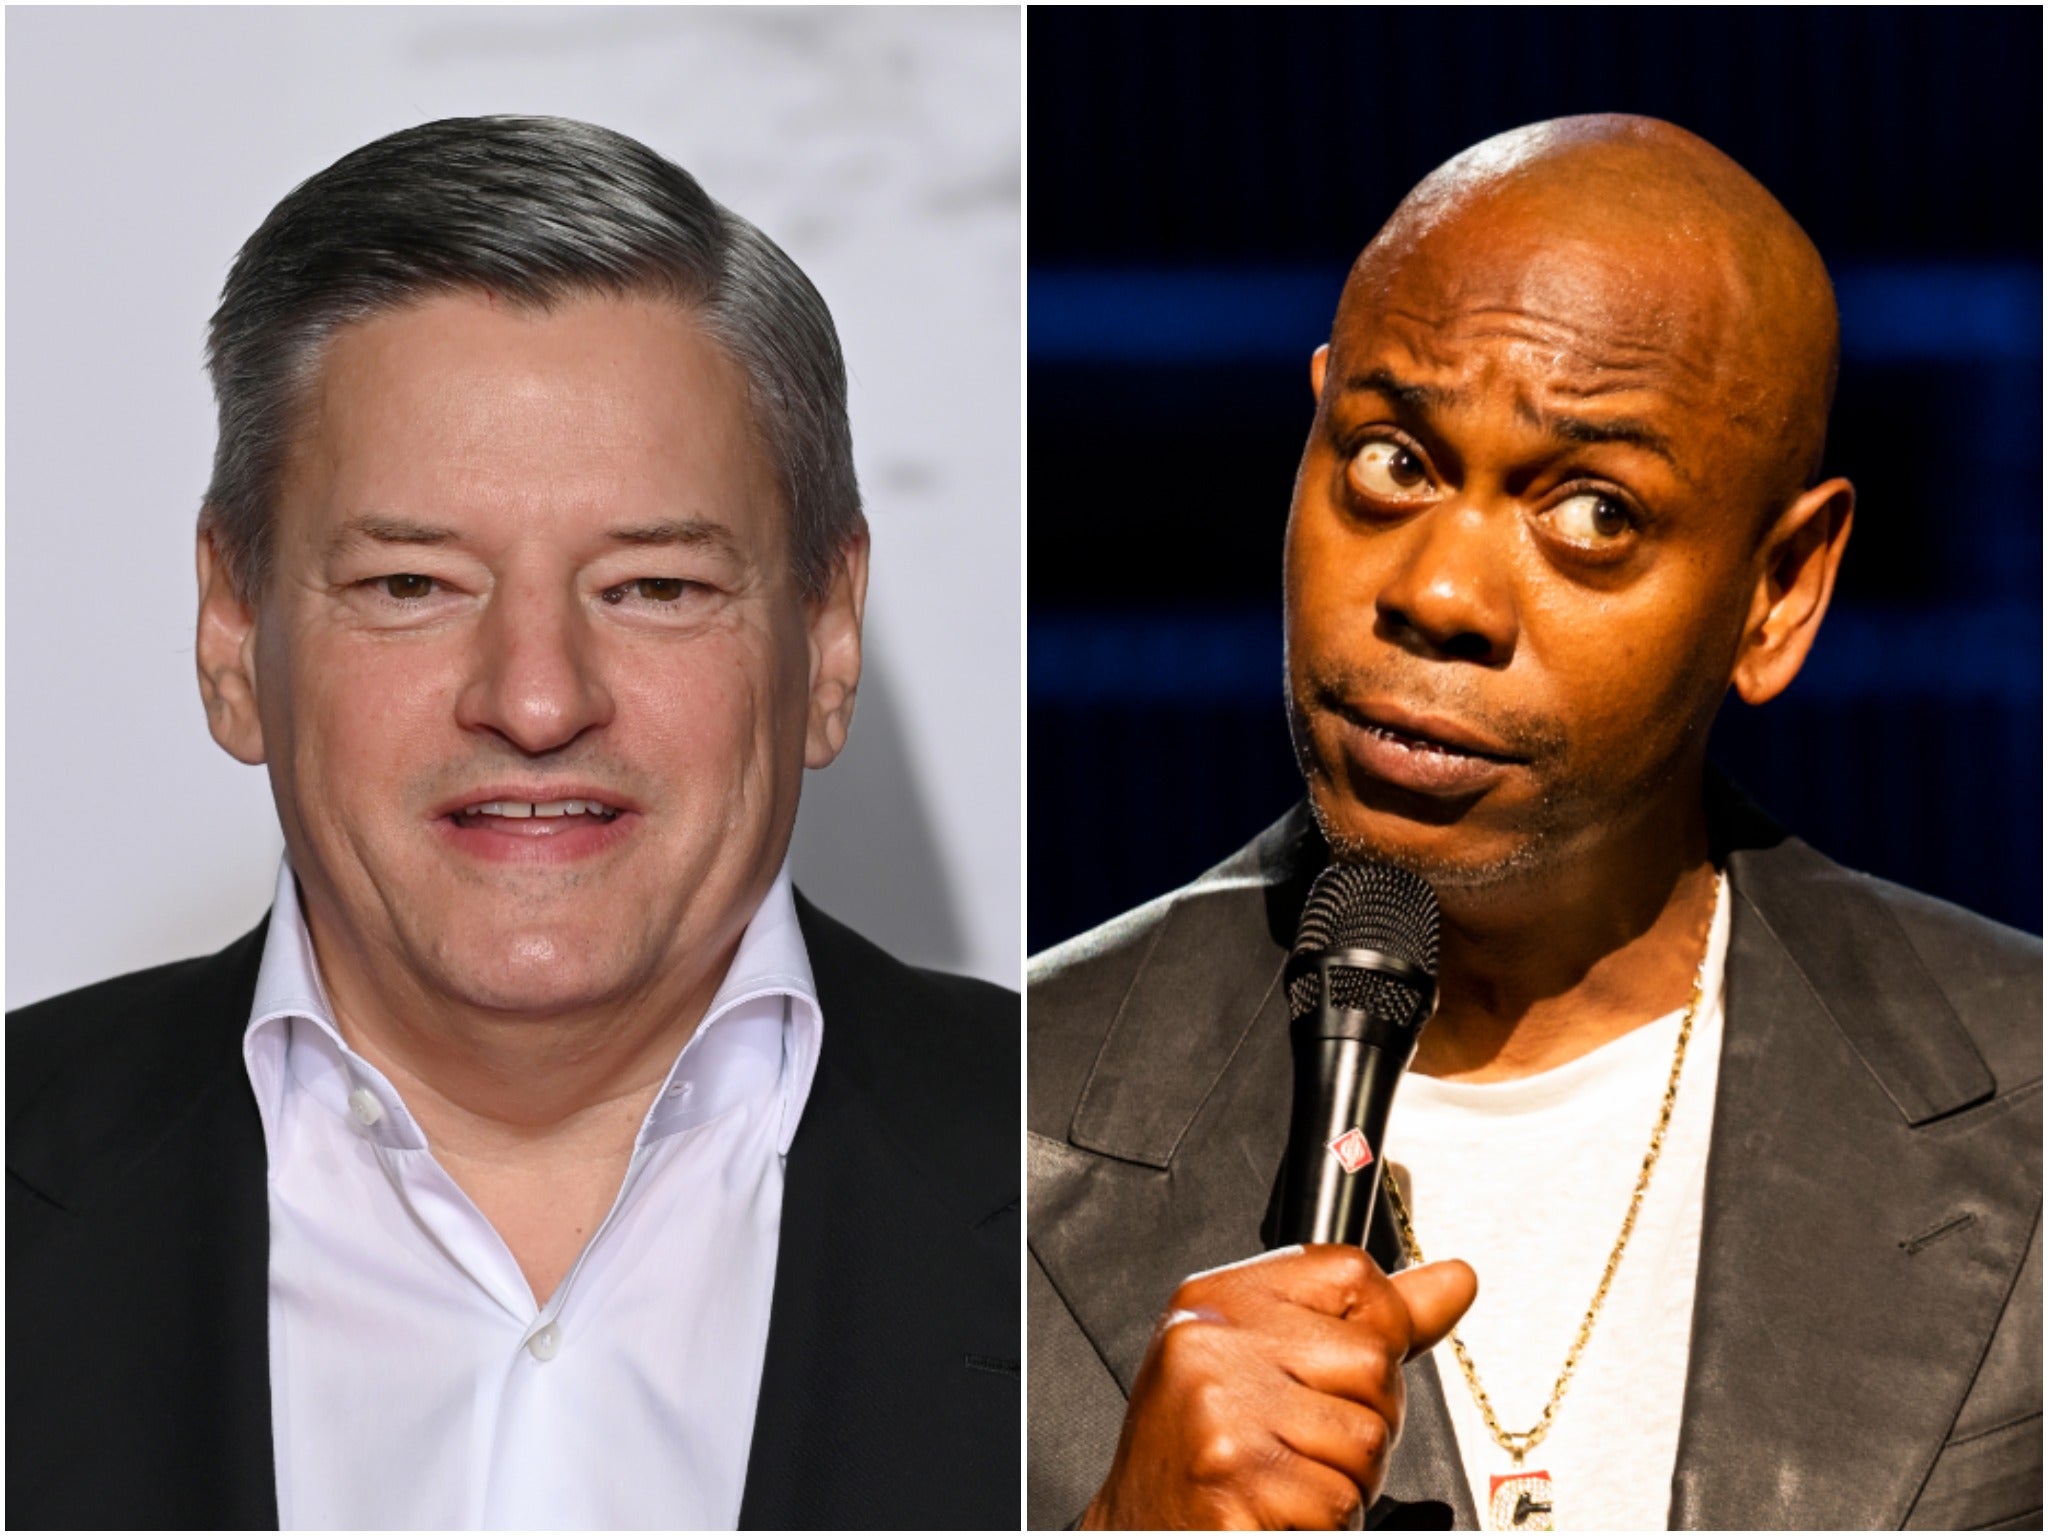 Ted Sarandos (left) has defended Chappelle